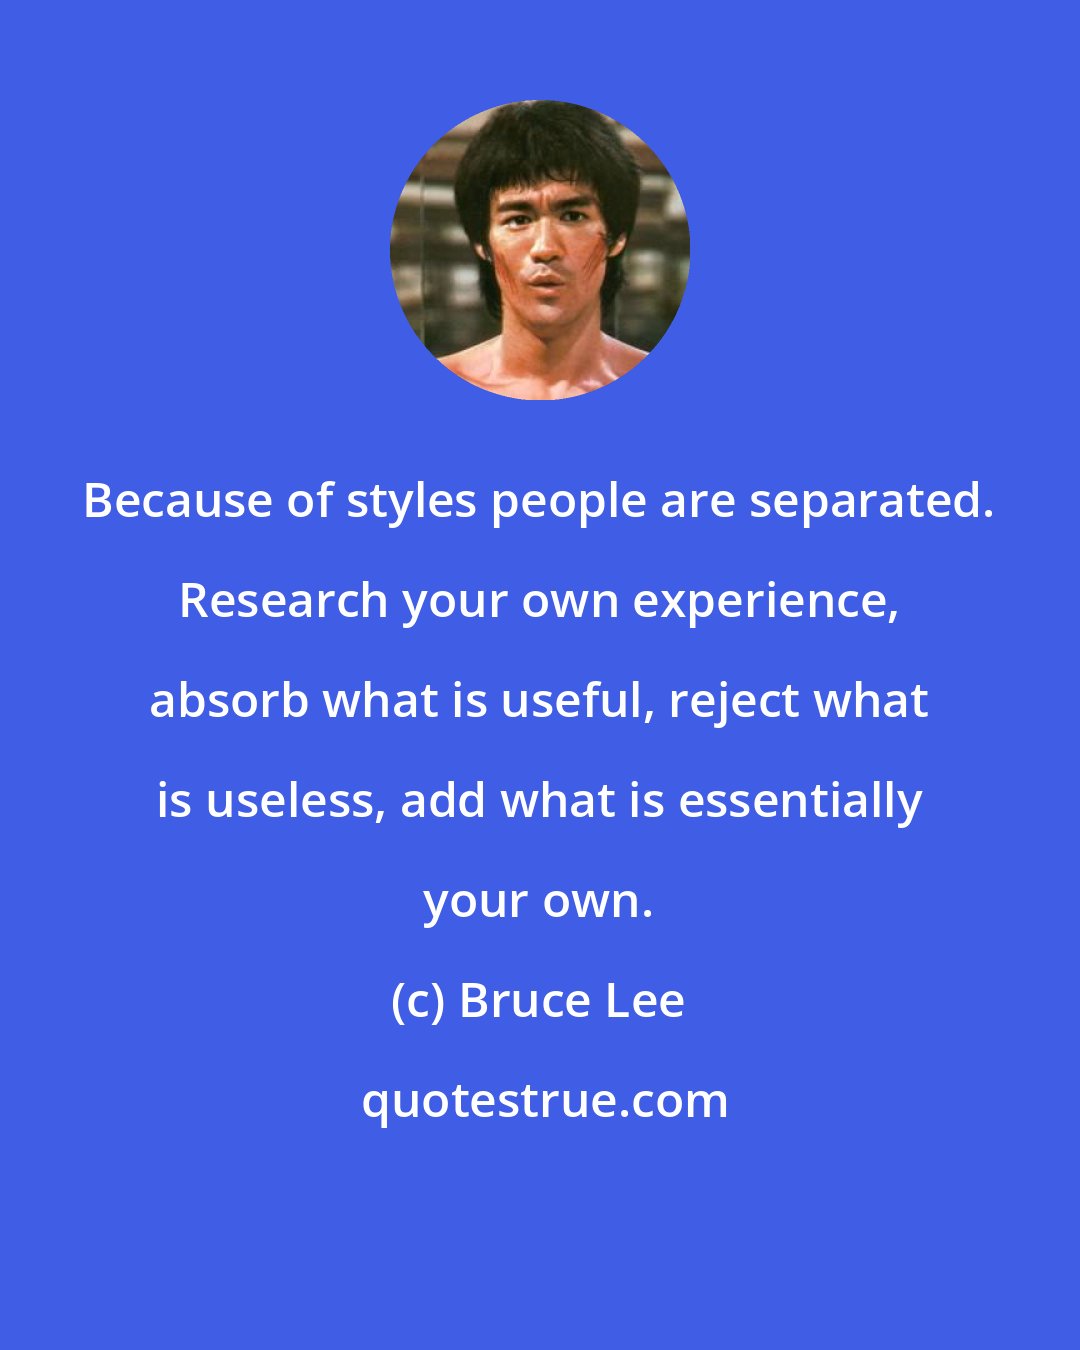 Bruce Lee: Because of styles people are separated. Research your own experience, absorb what is useful, reject what is useless, add what is essentially your own.